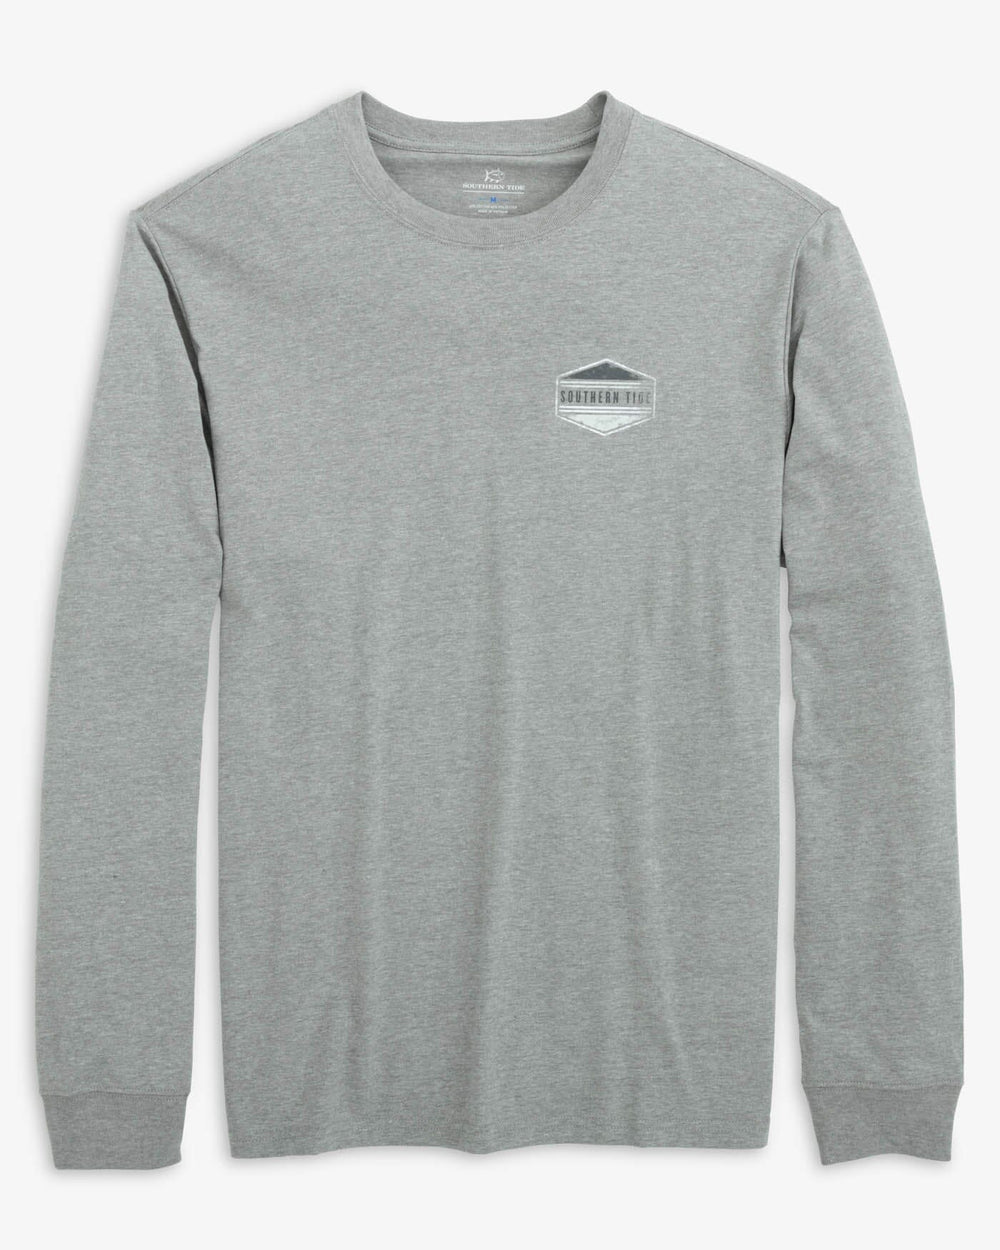 The front view of the Southern Tide Heather ST Deer Hexagon Long Sleeve T-Shirt by Southern Tide - Heather Quarry